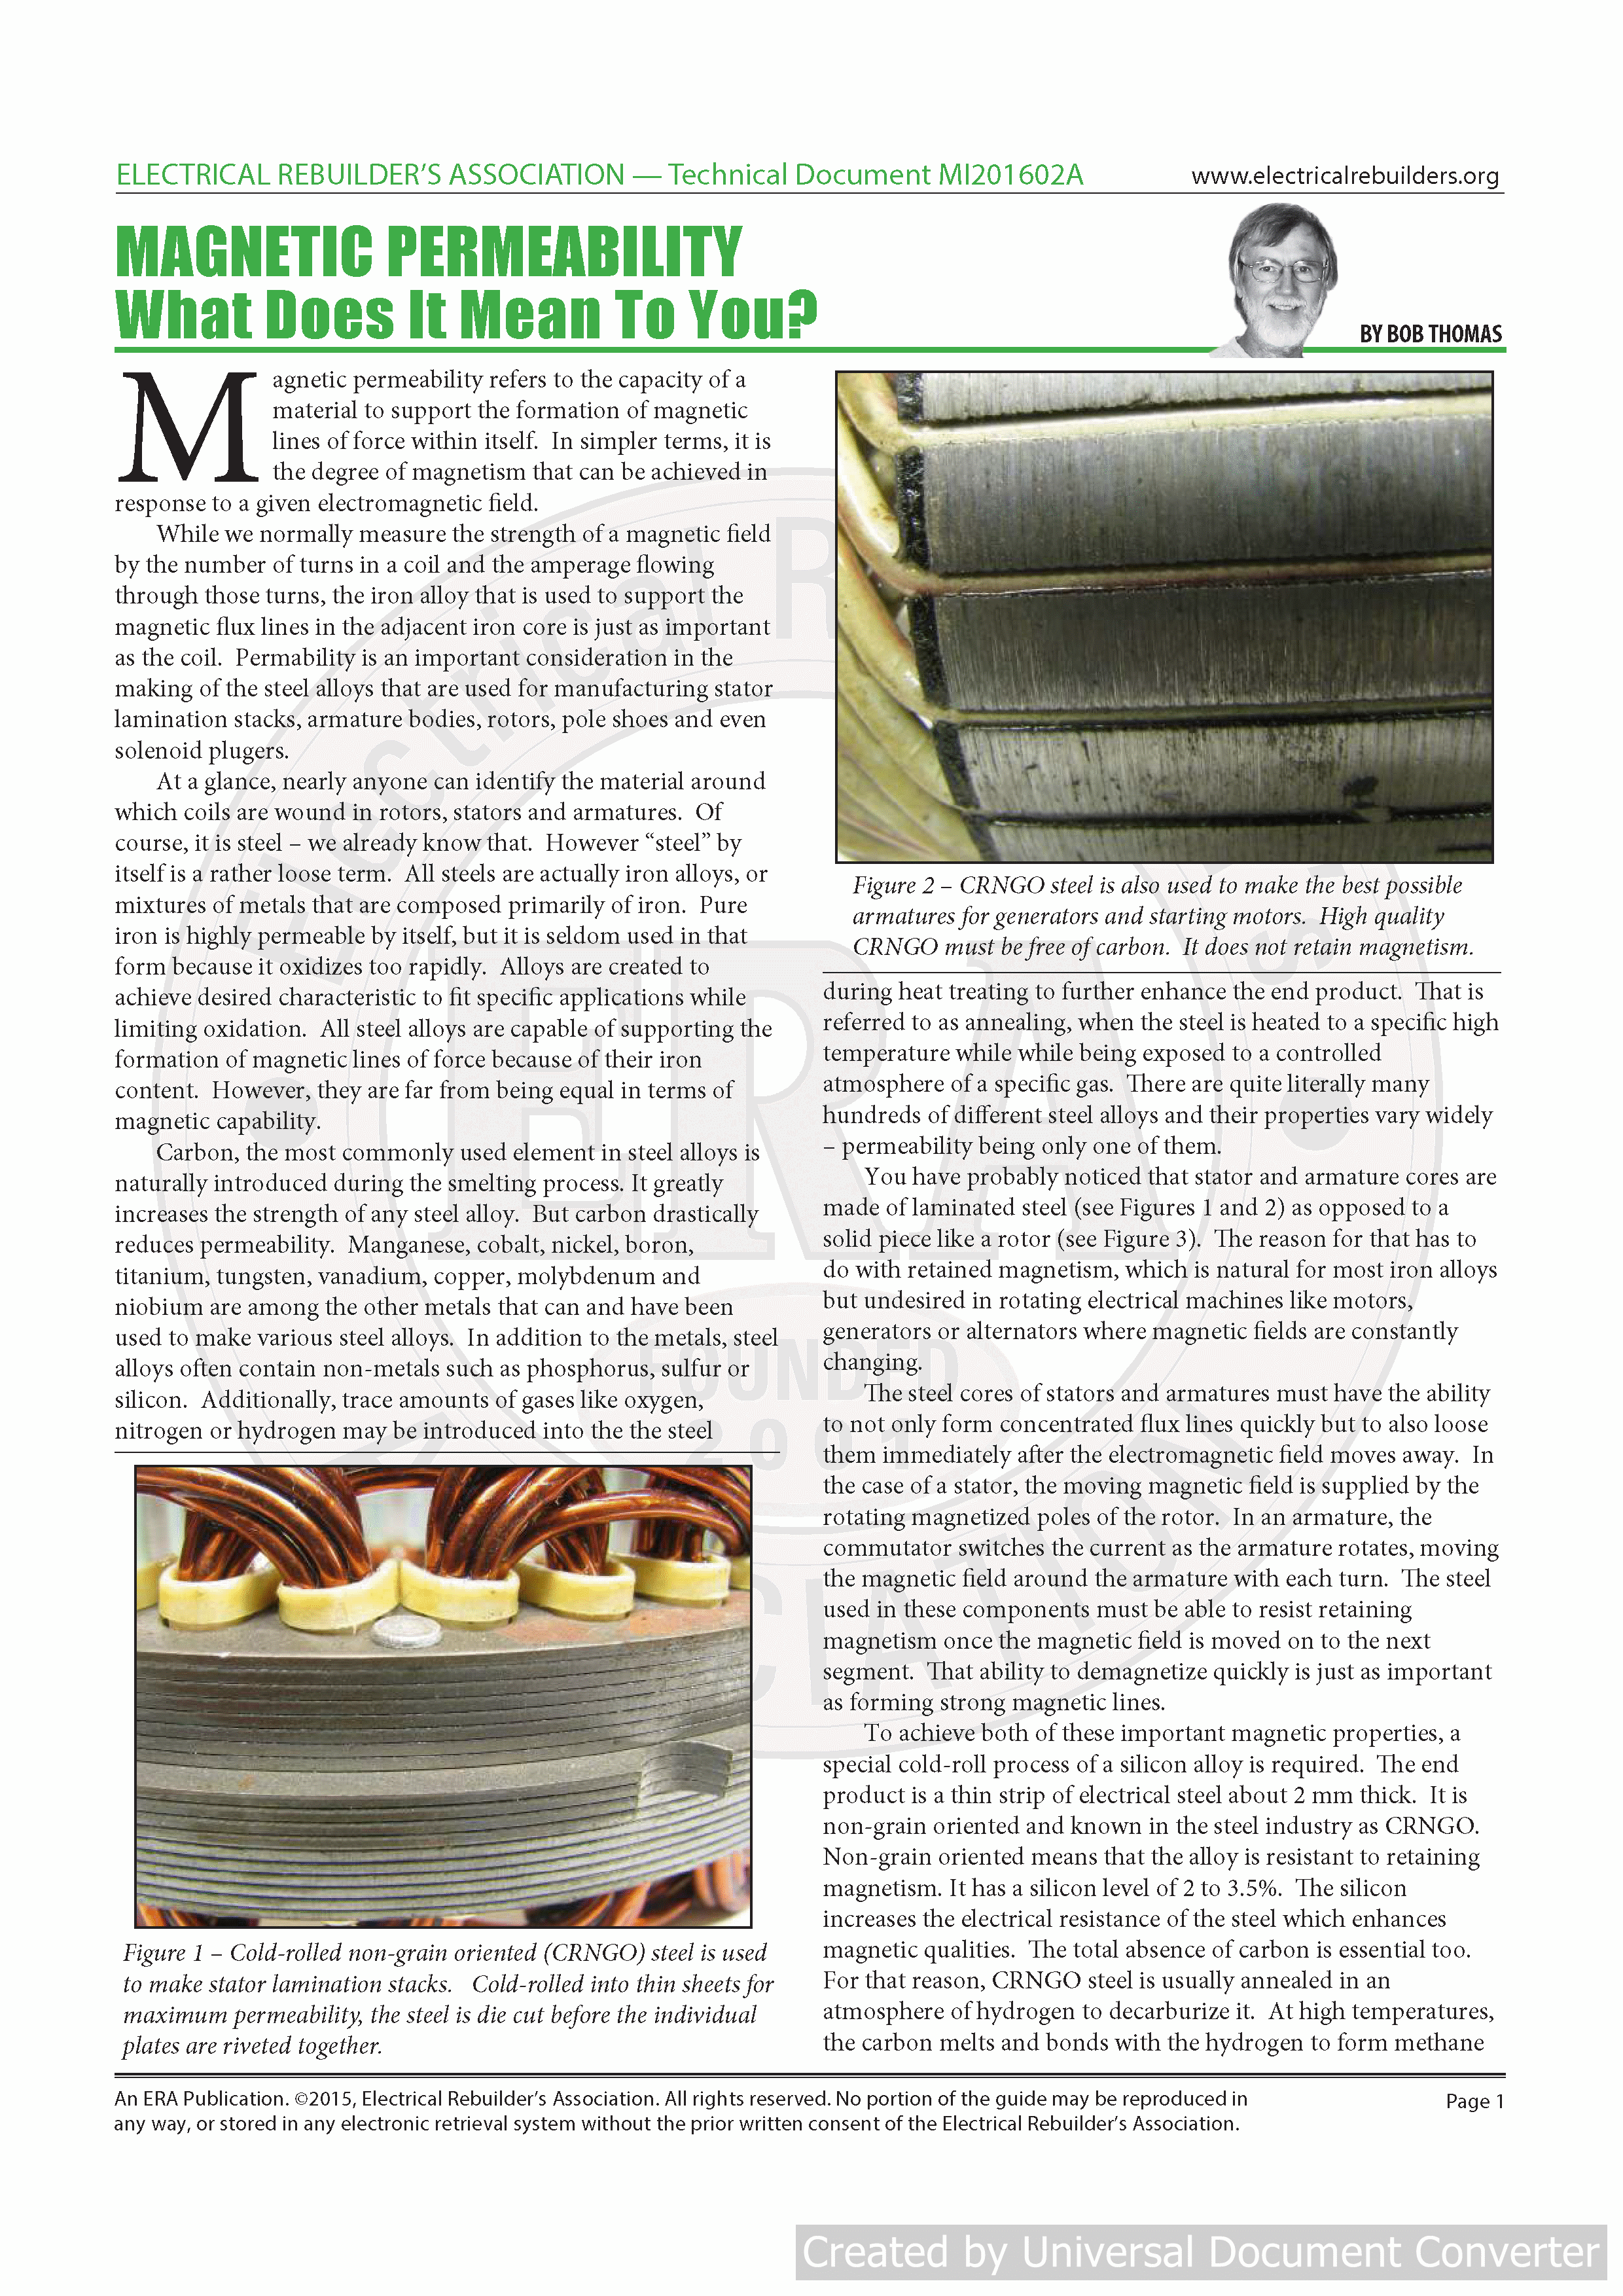 Article Image